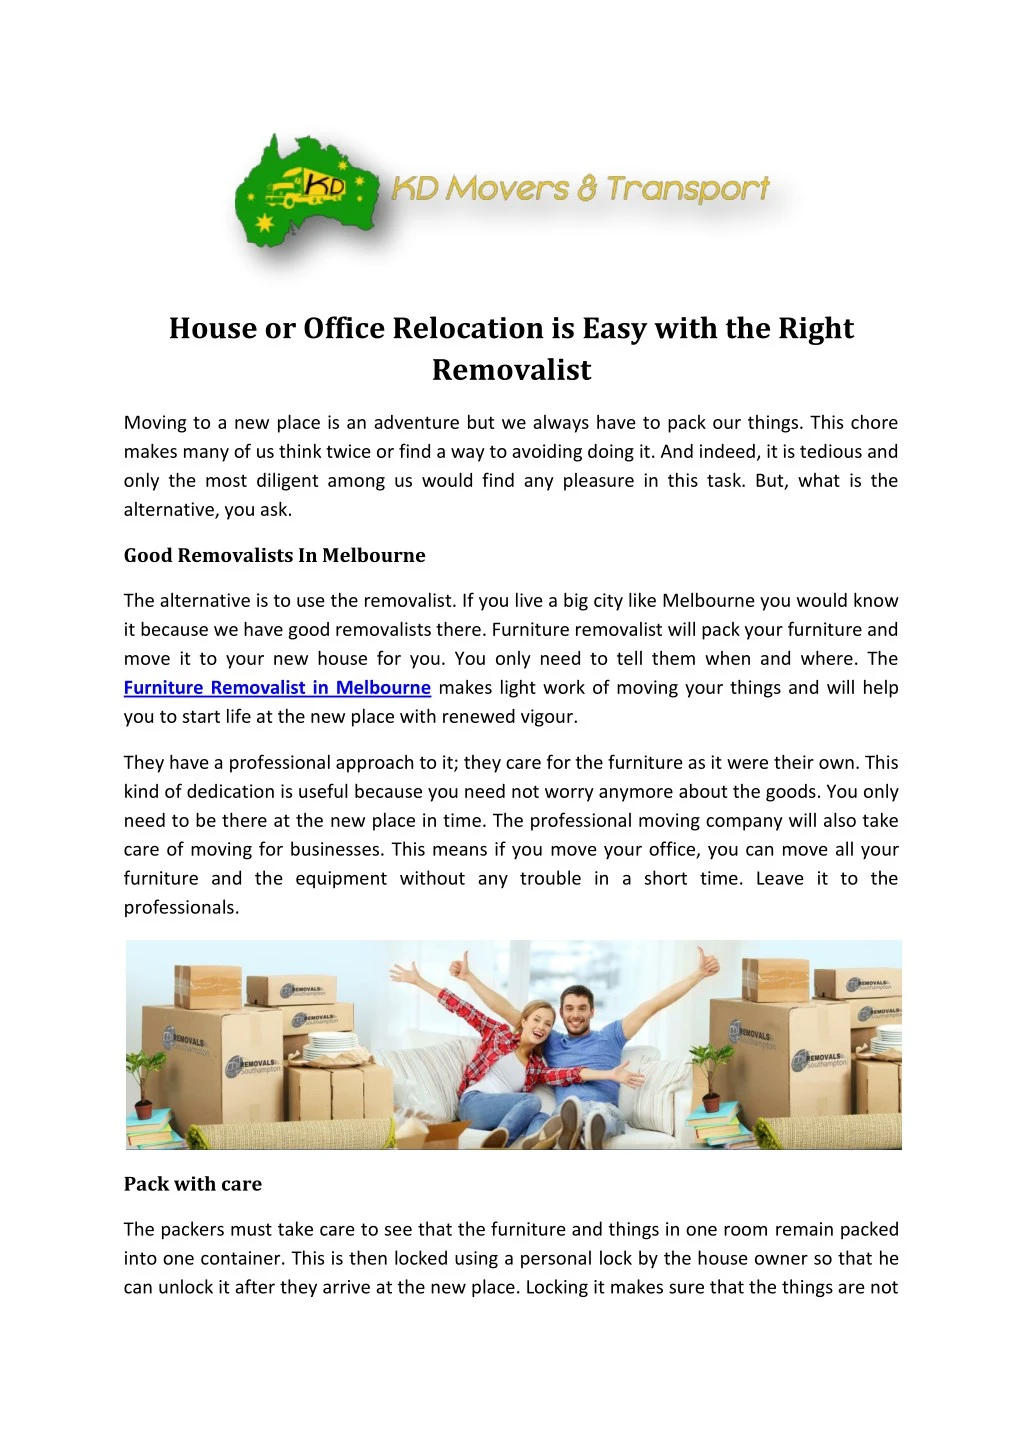 house or office relocation is easy with the right